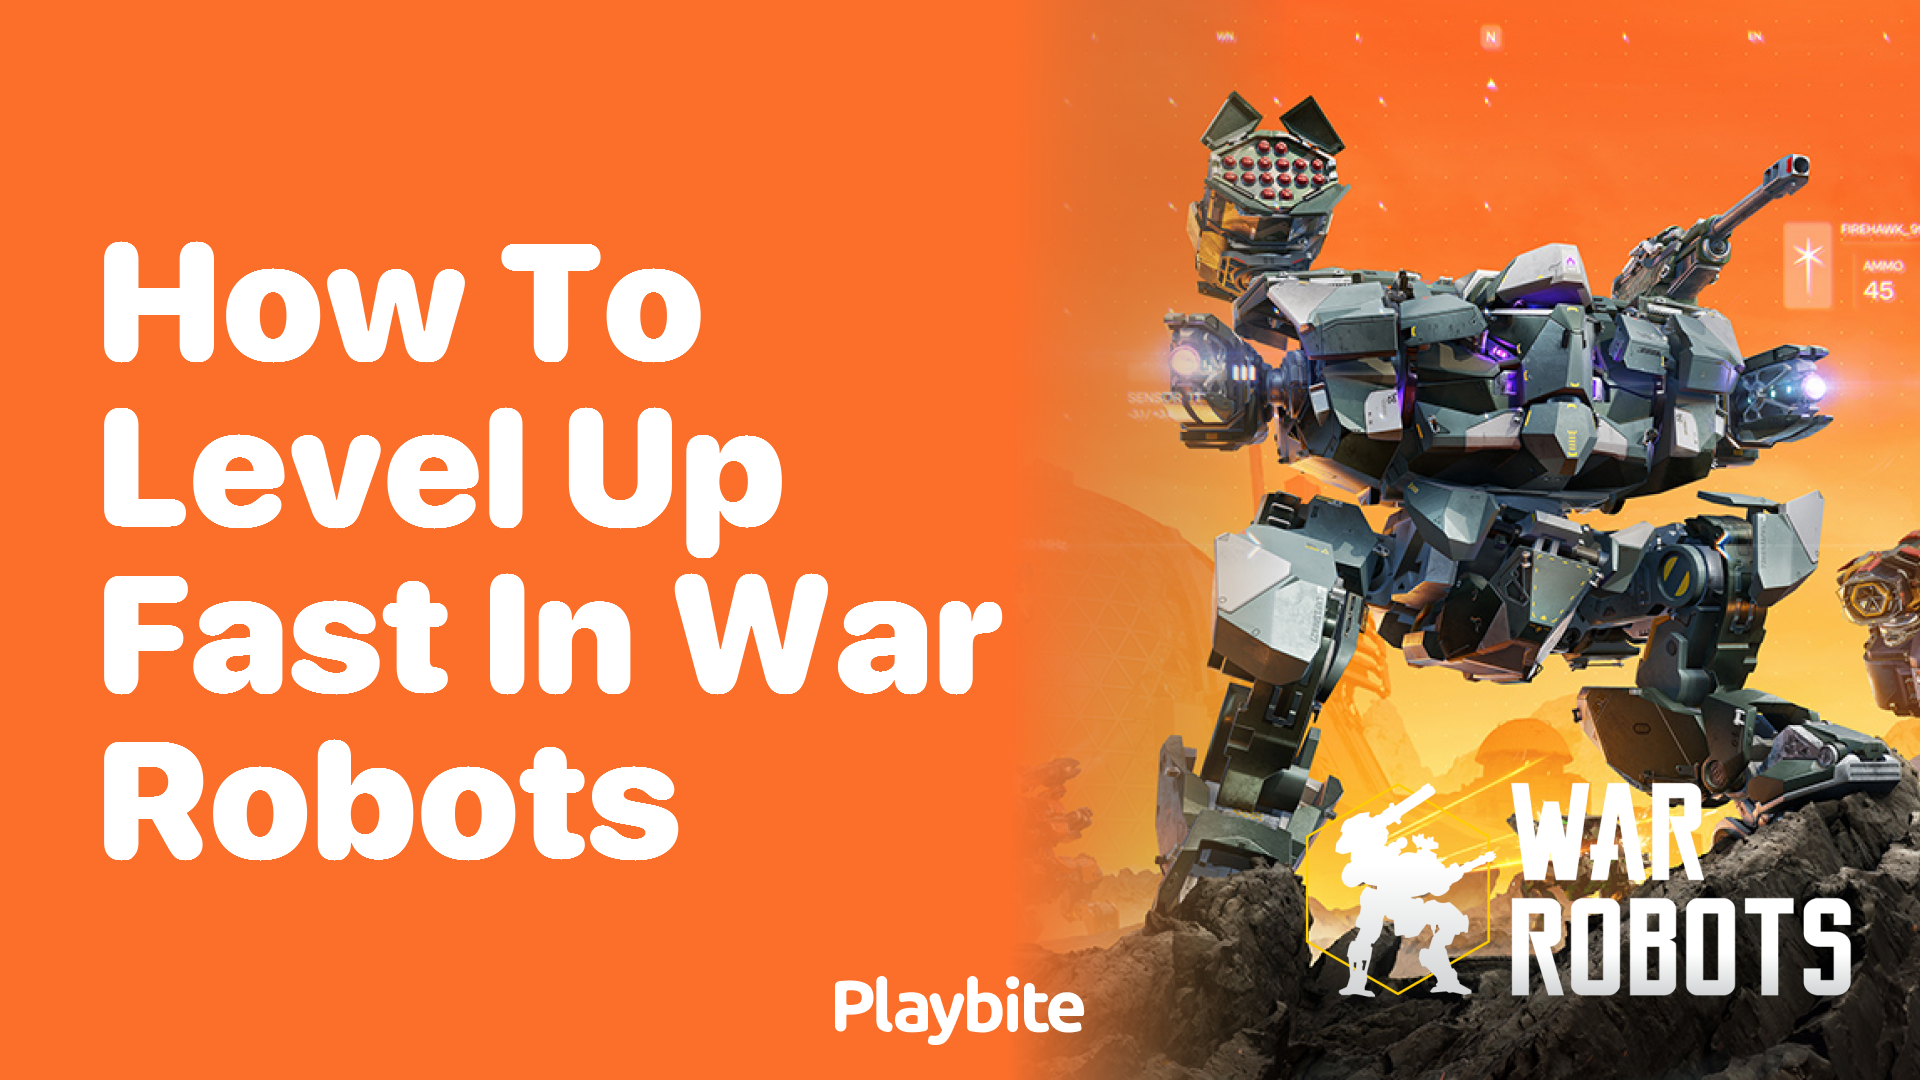 How to Level Up Fast in War Robots